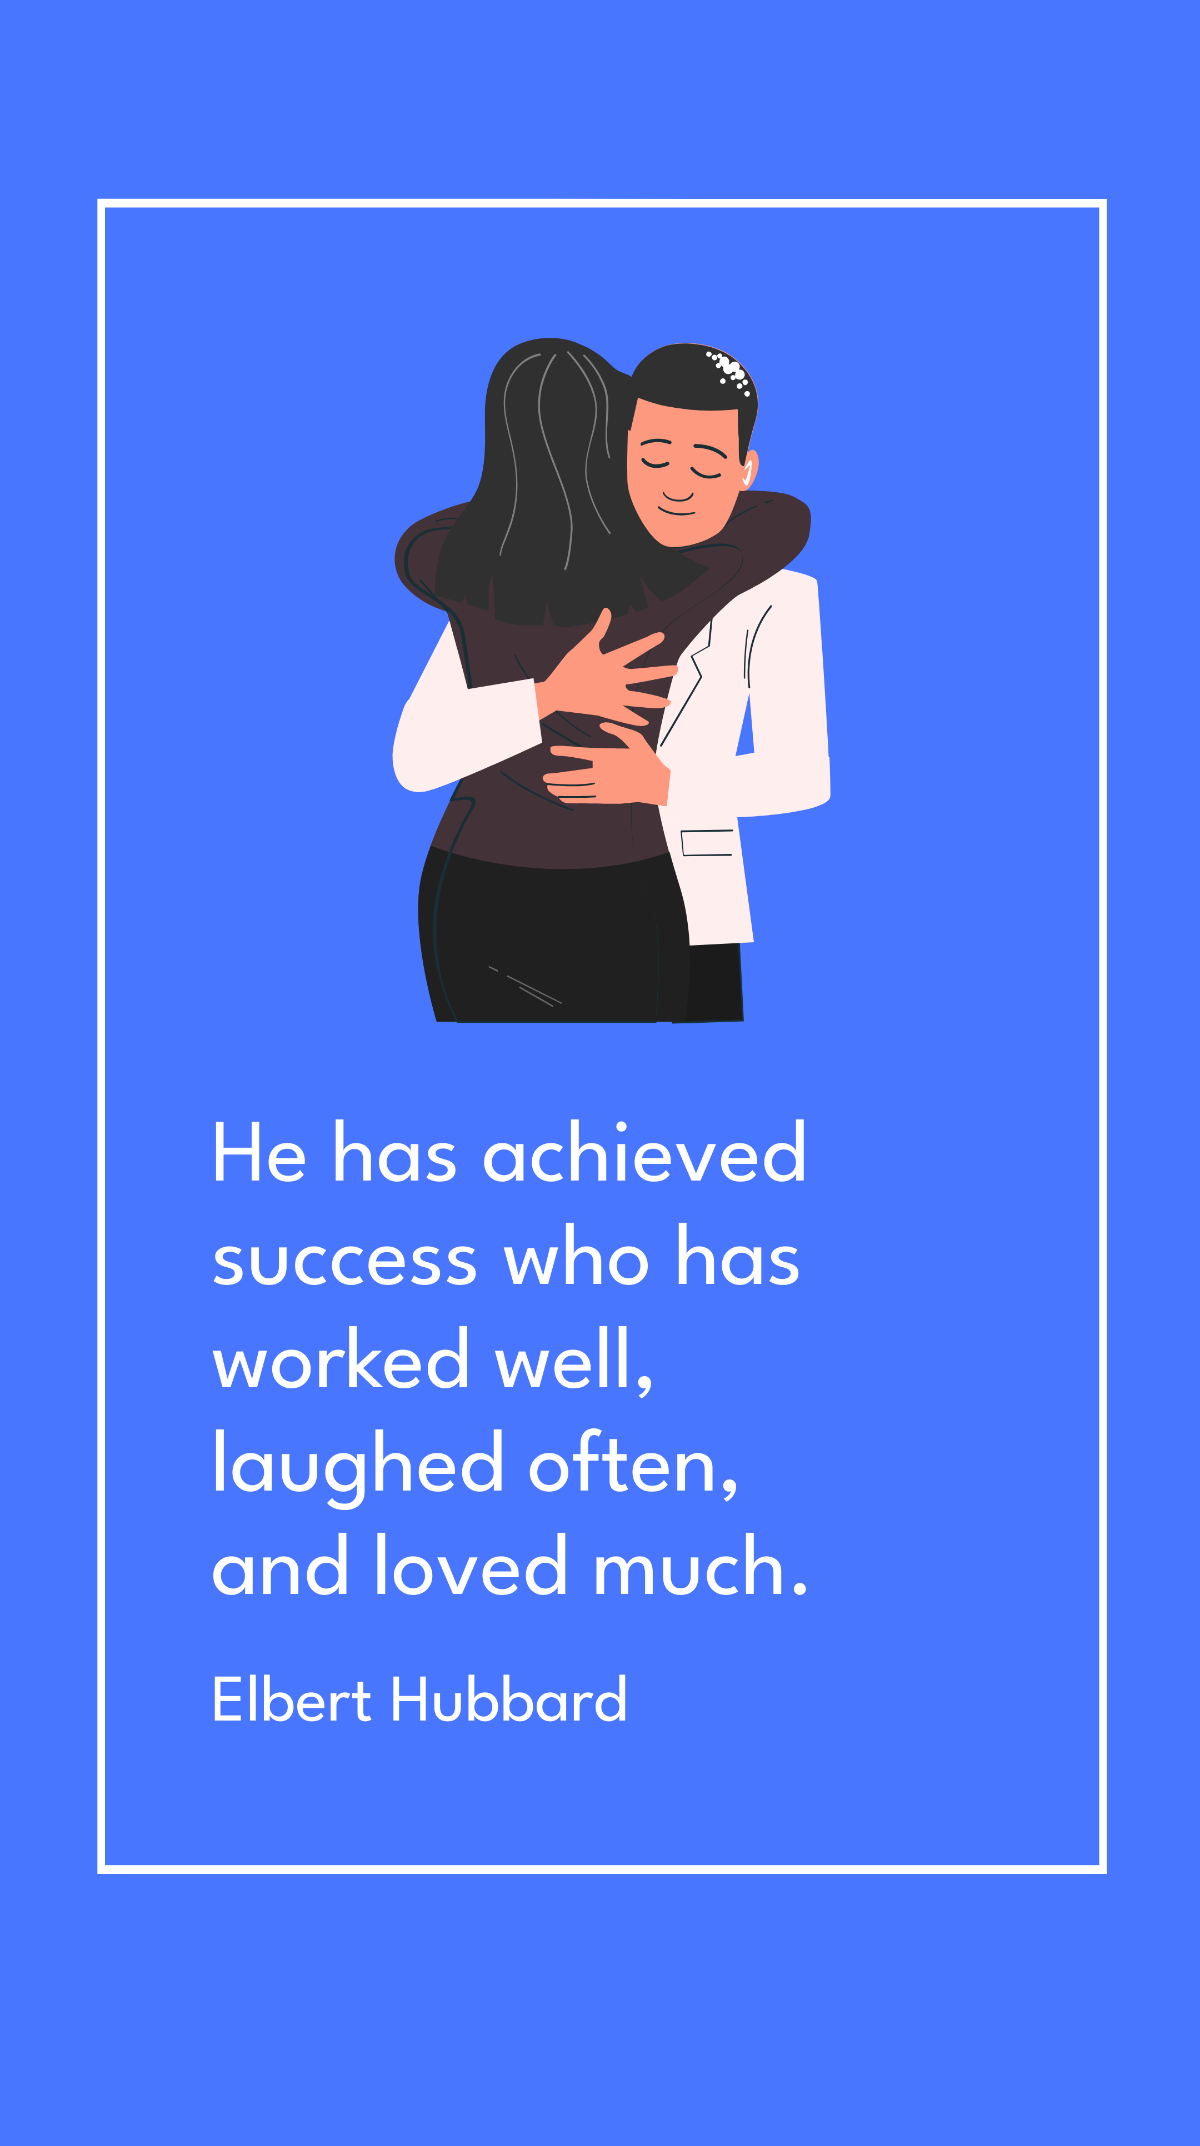 Elbert Hubbard - He has achieved success who has worked well, laughed often, and loved much. Template